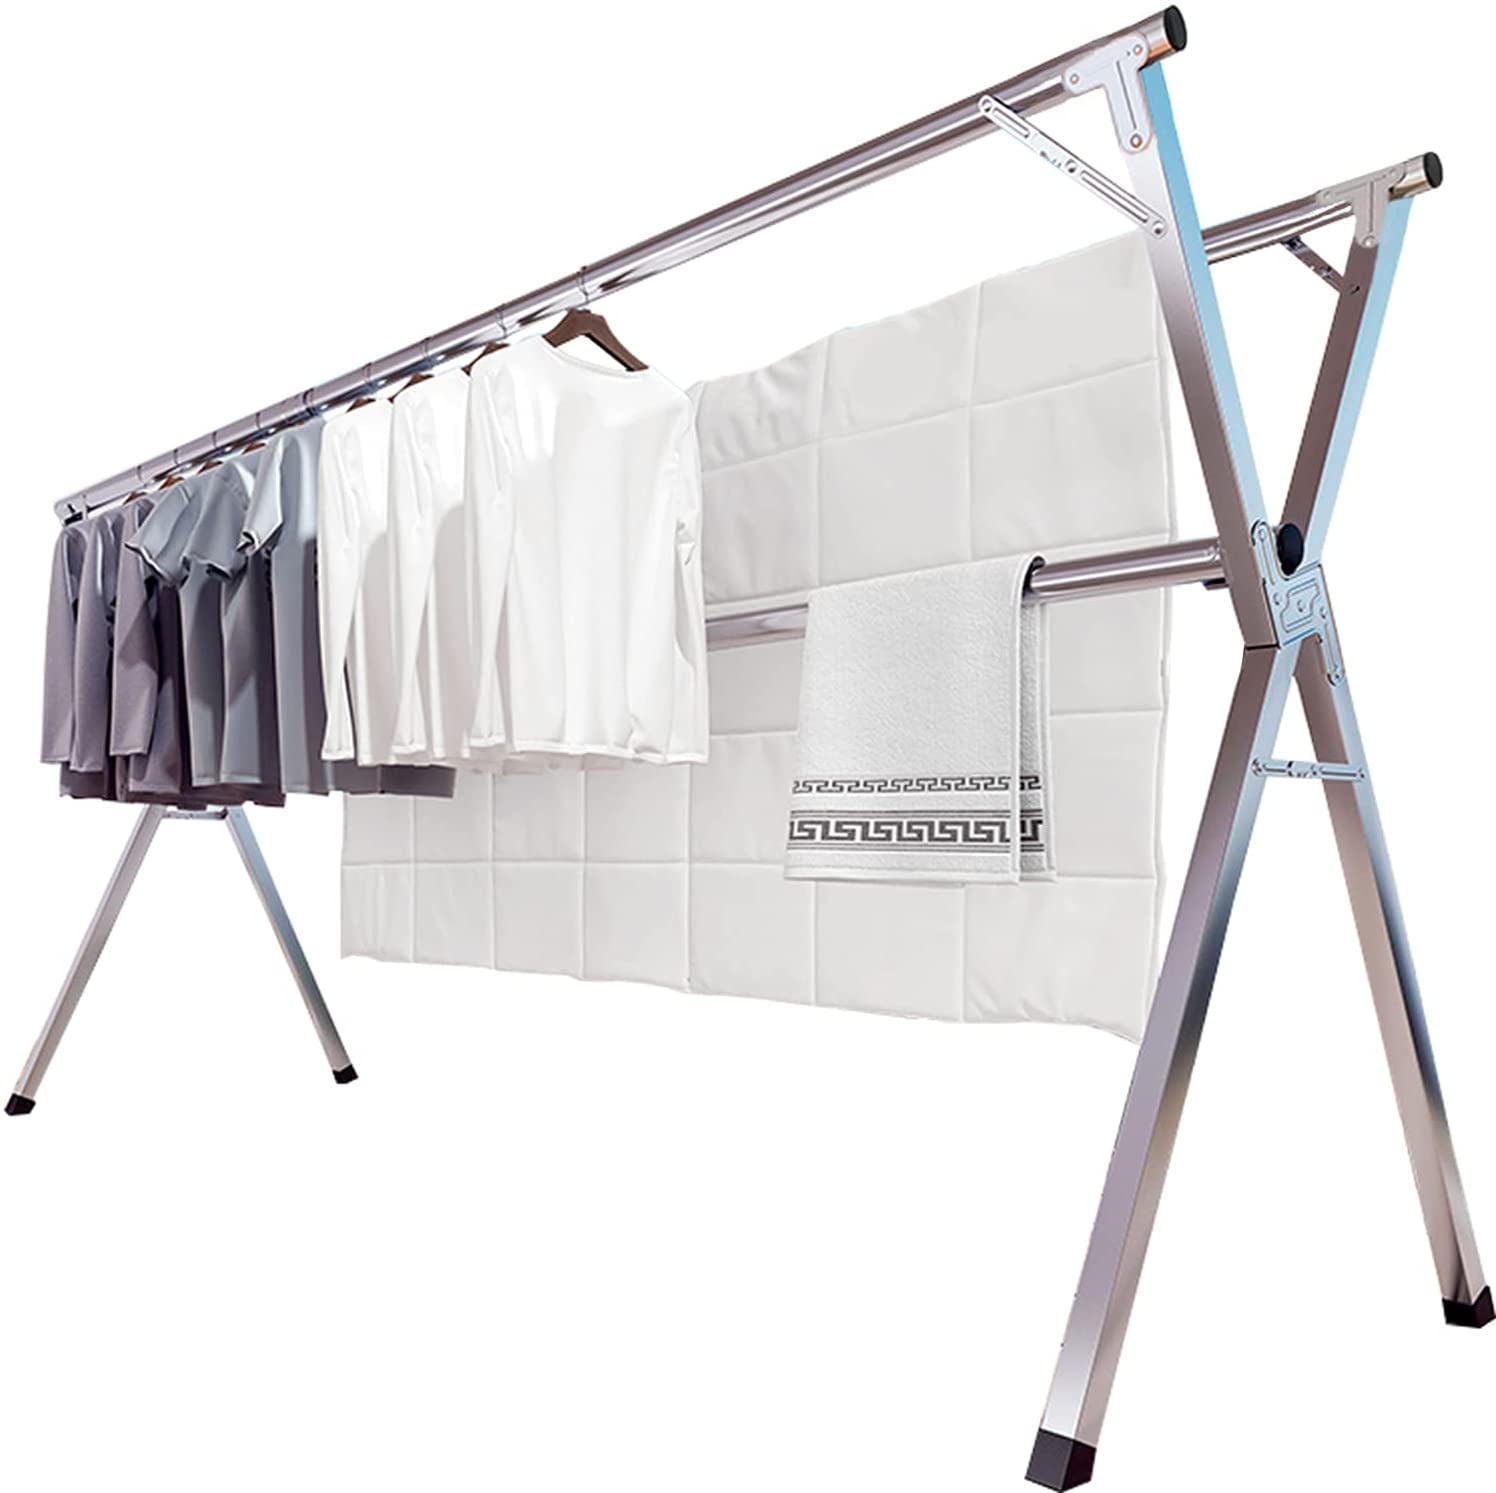 Stainless Steel Laundry Clothes Drying Racks Folding Heavy Duty Garment Rack NEW 